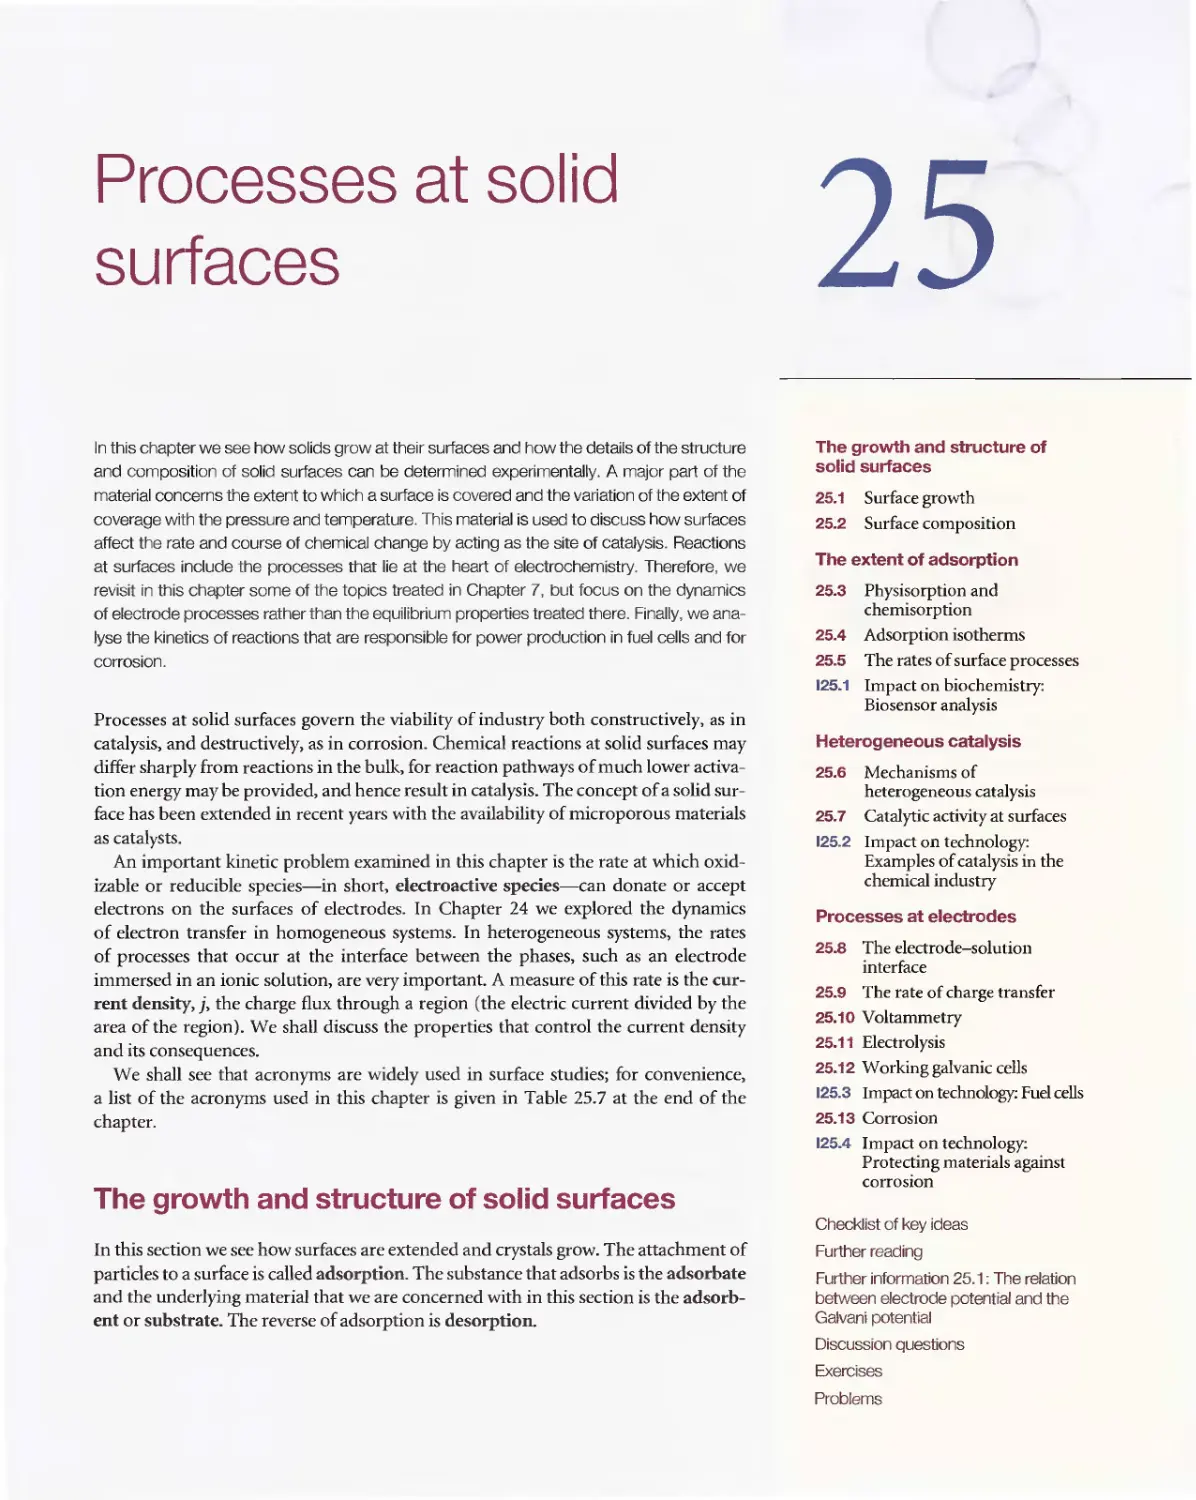 25 - Processes at solid surfaces